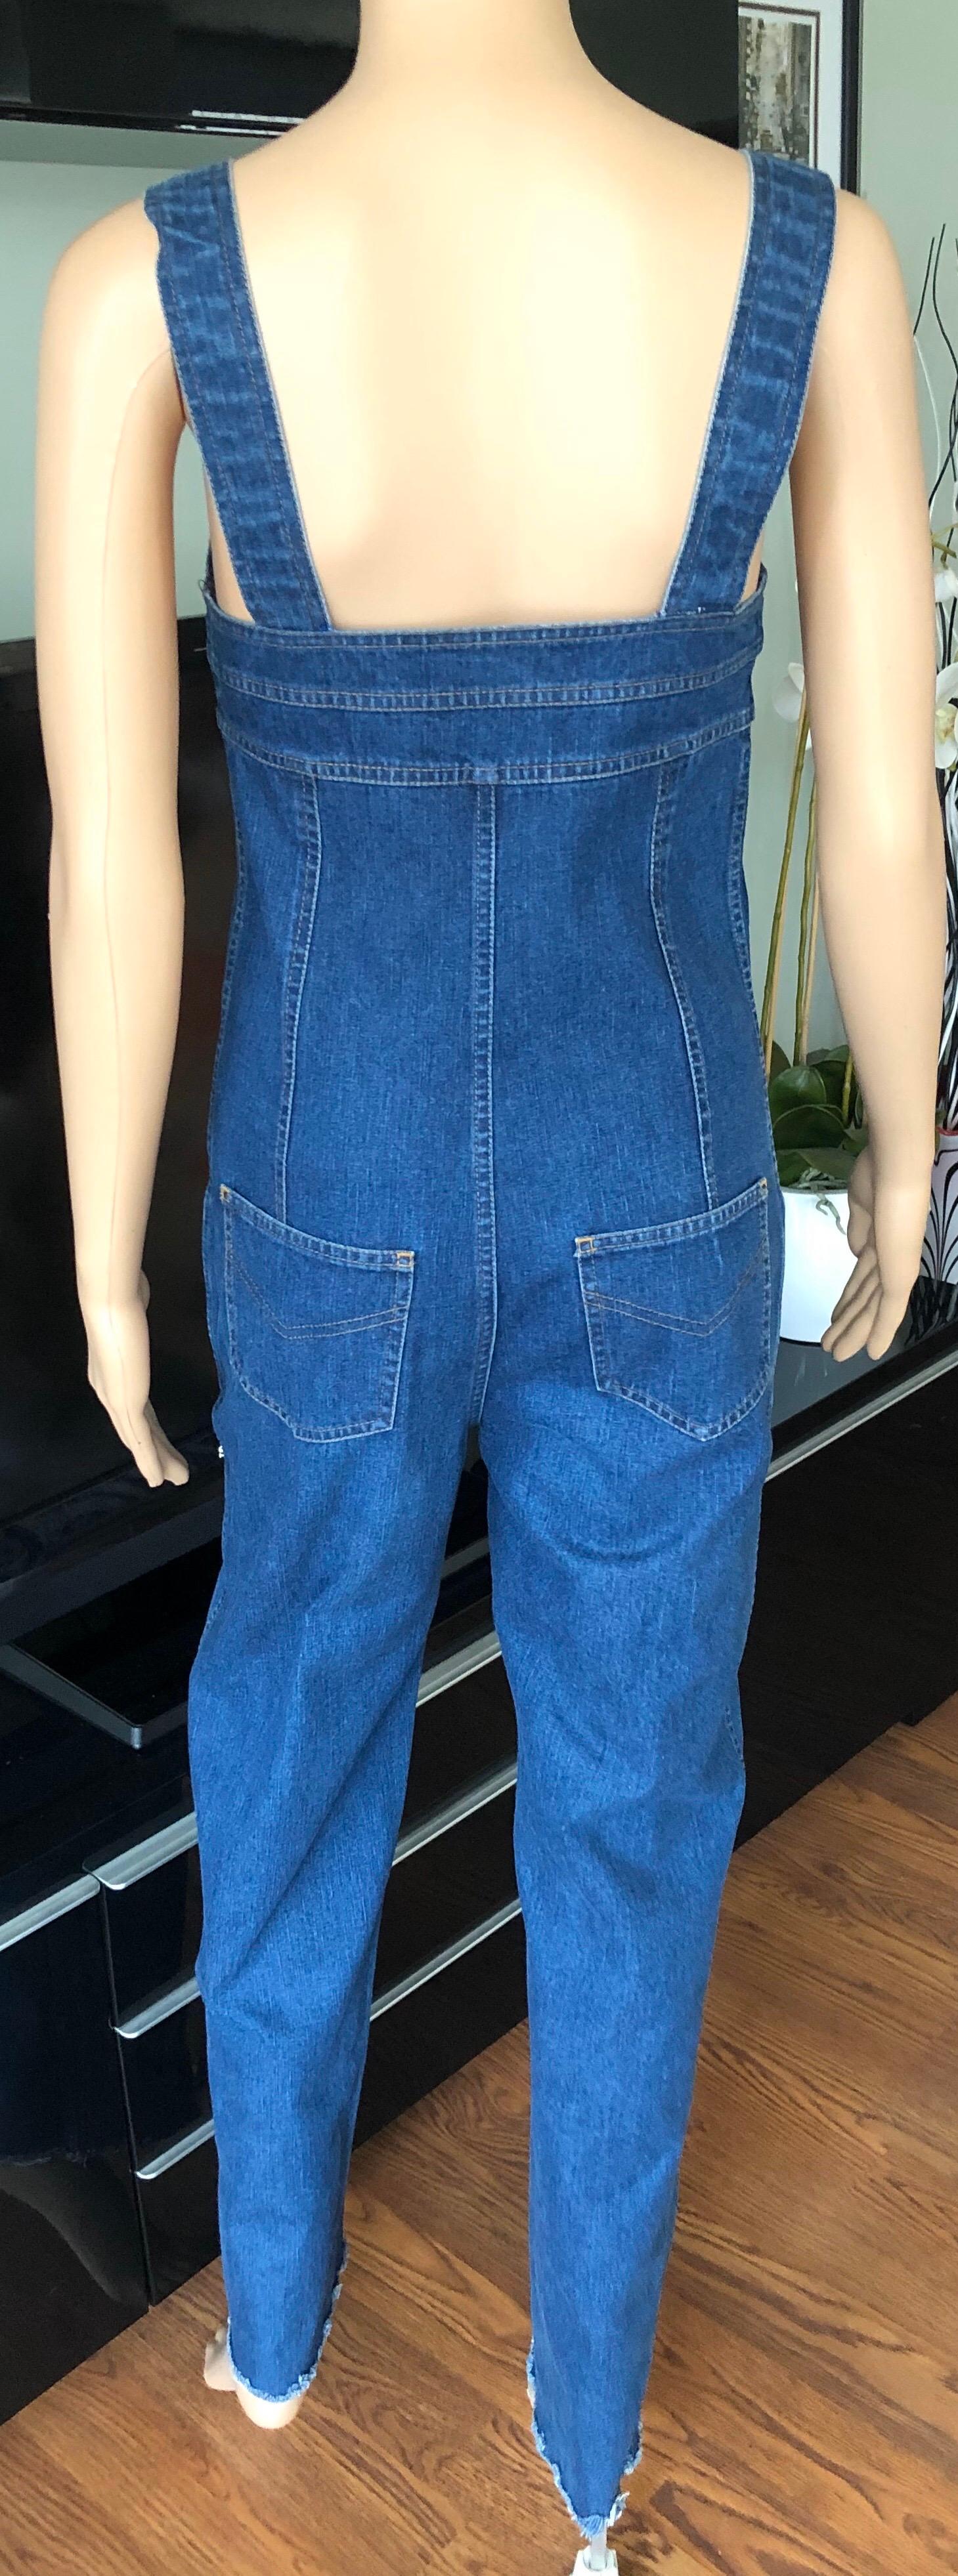 Chanel c. 1990 Vintage Blue Denim Overalls Romper Jumpsuit FR 36

Chanel blue medium wash denim jumpsuit featuring contrast stitching throughout, raw edge hem and zip closure at front with additional cc logo button closures.